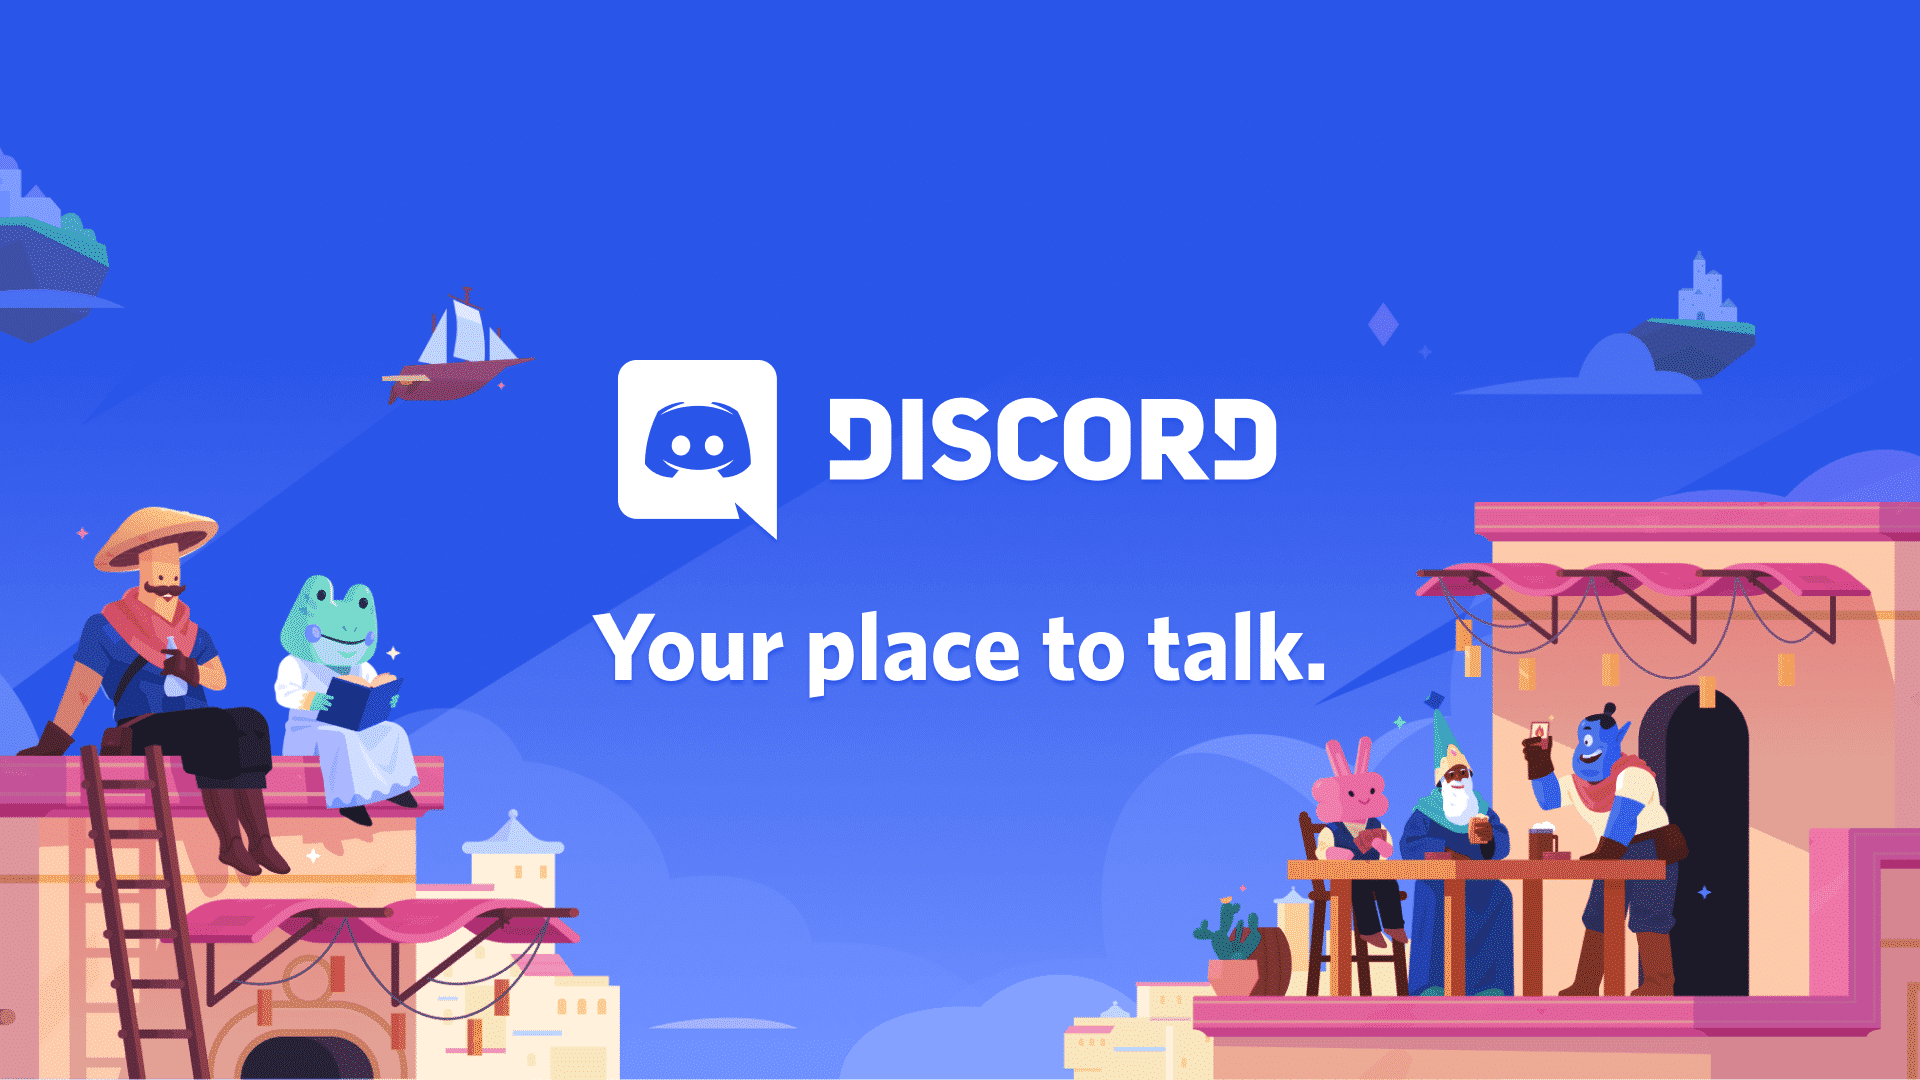 discord push to talk stopped working at all